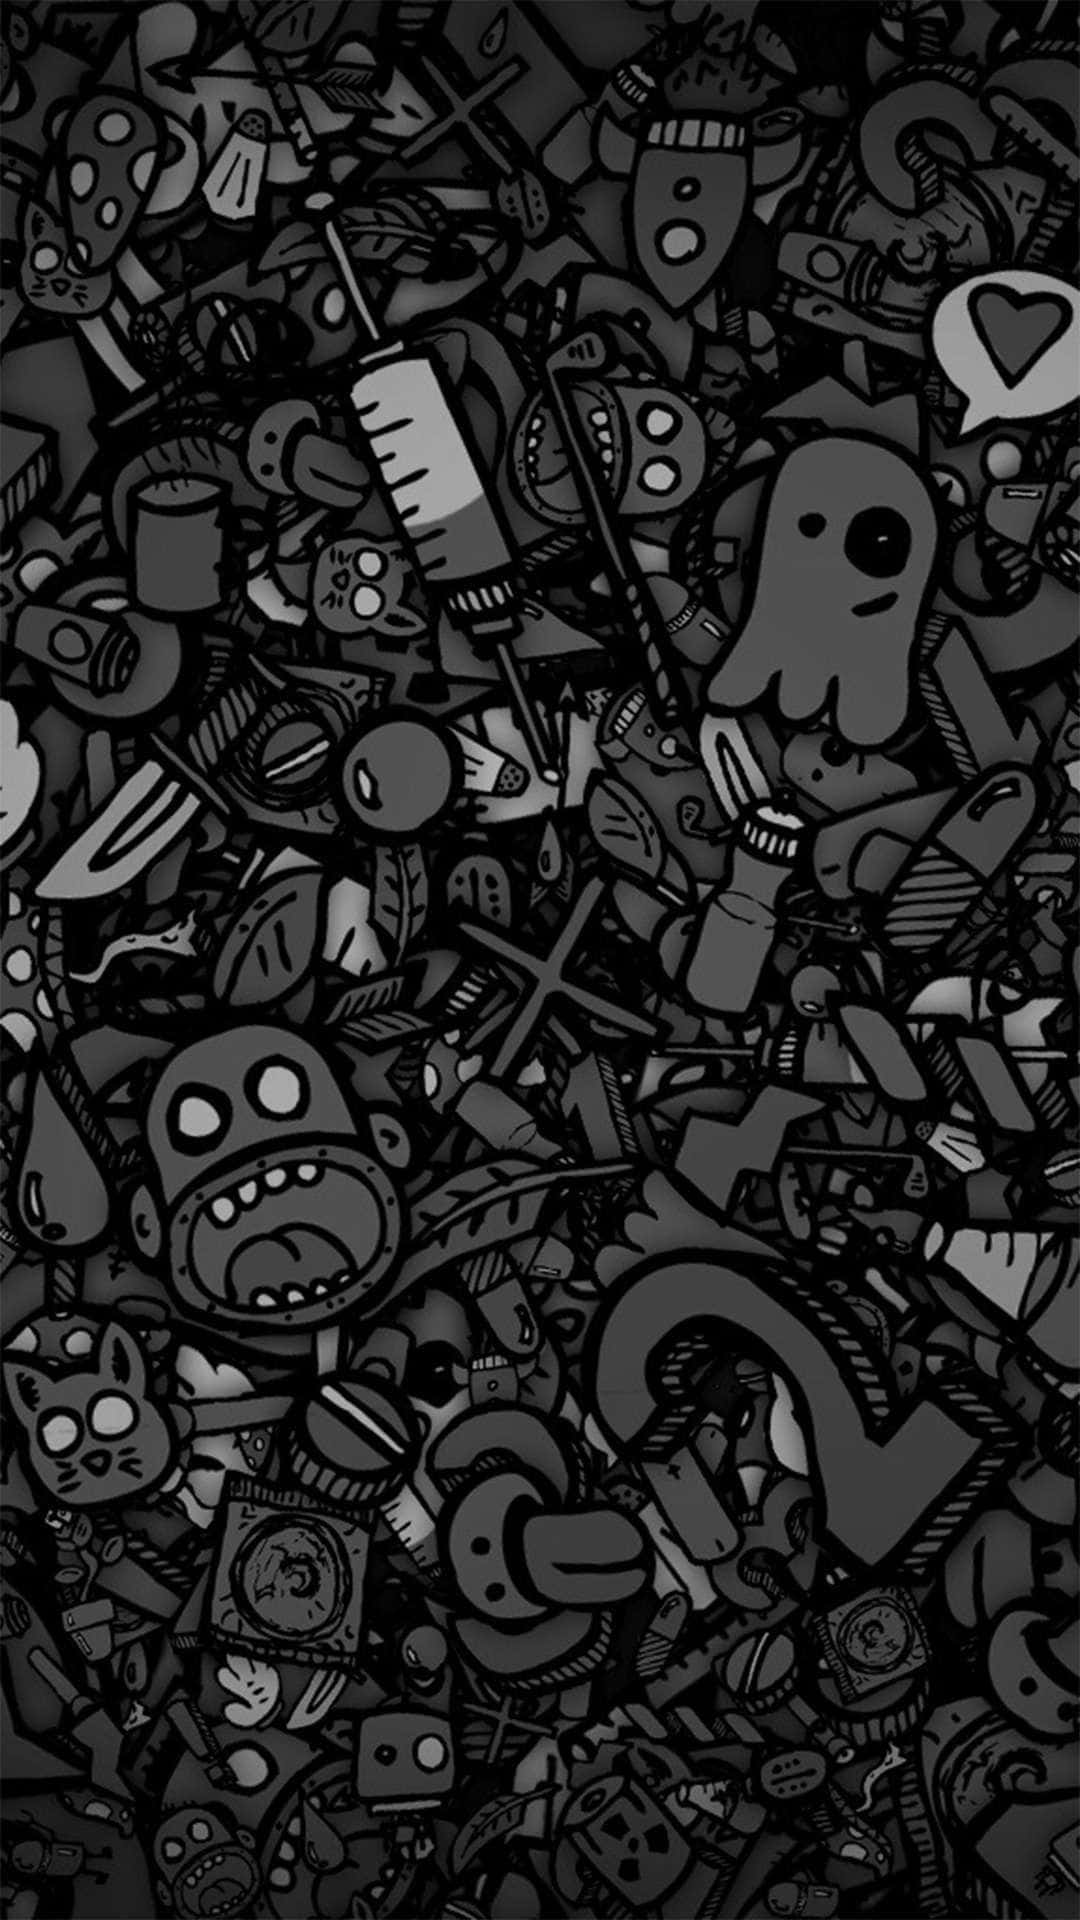 A Black And White Image Of A Black And White Doodle Wallpaper